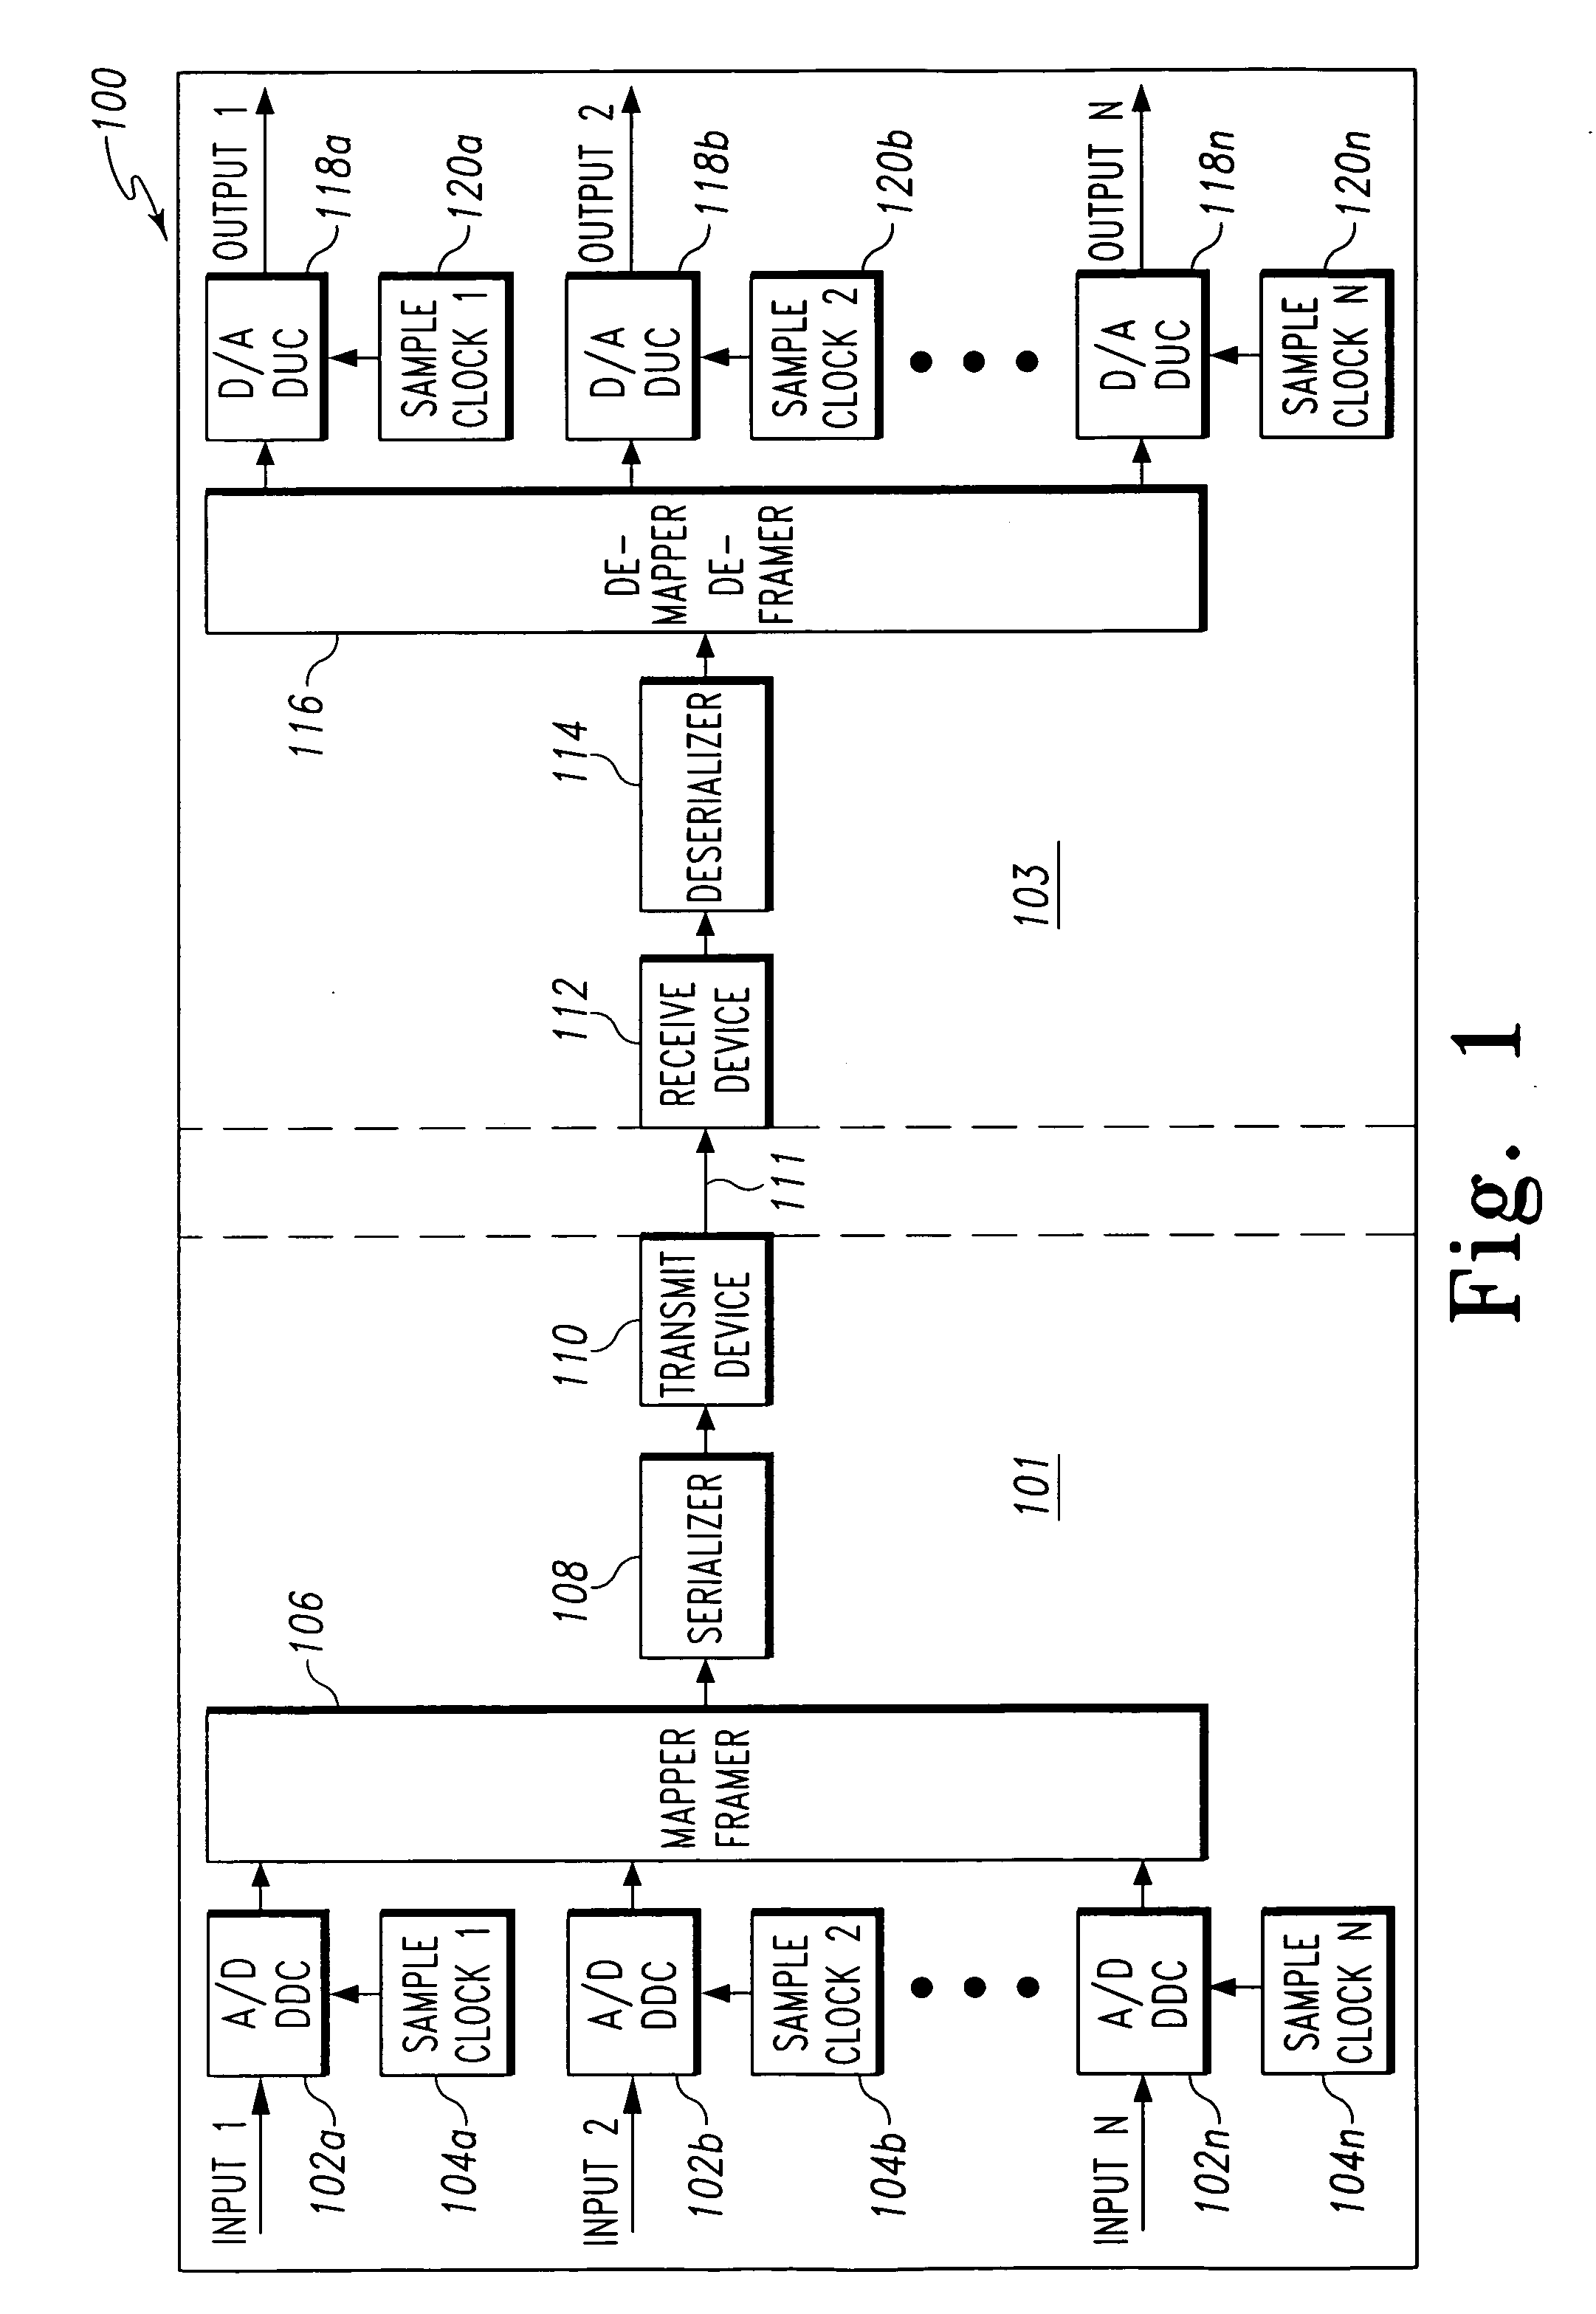 System and method for enhancing the performance of wideband digital RF transport systems